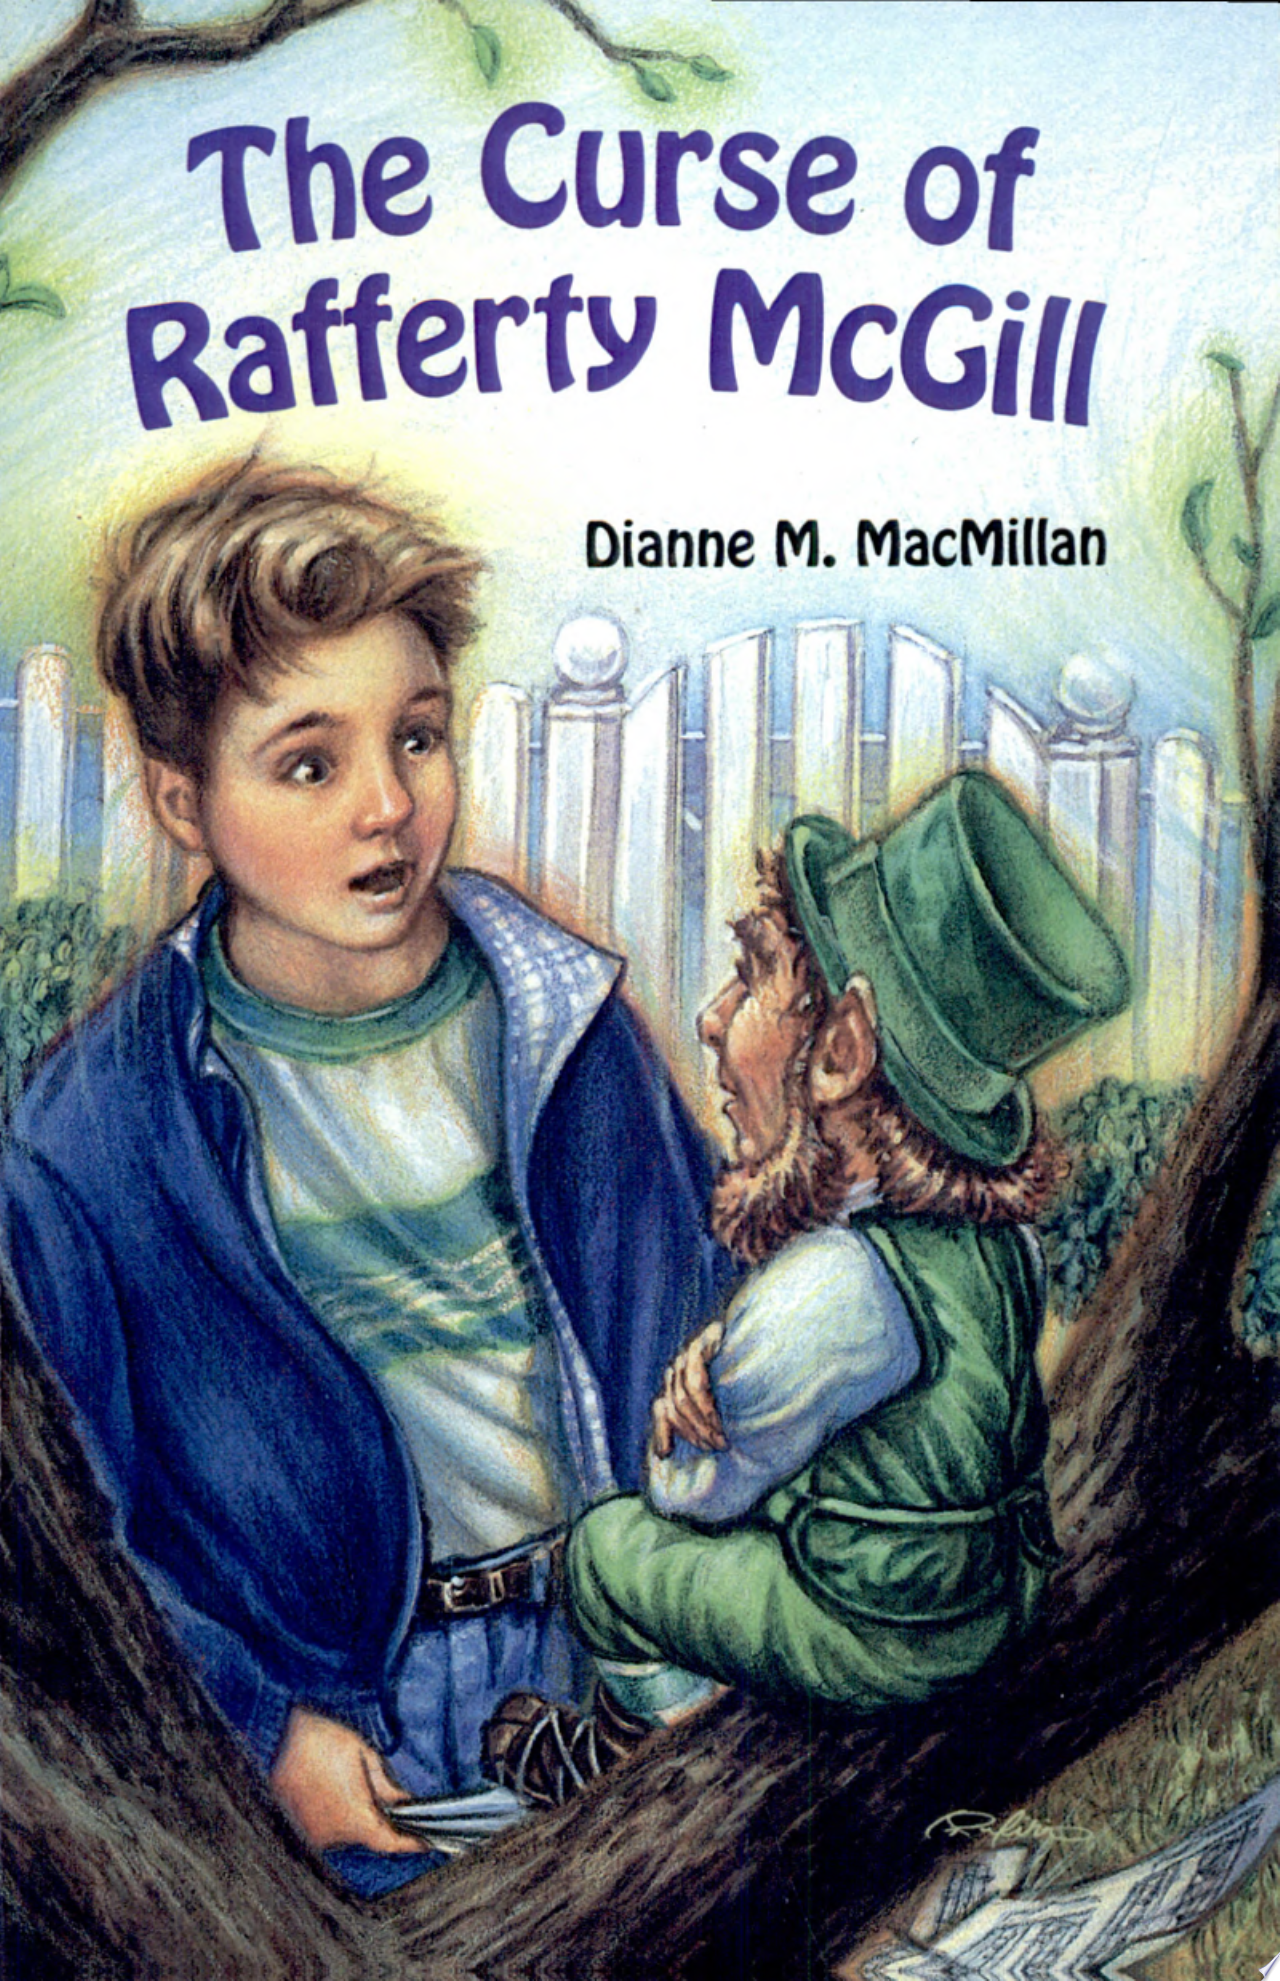 Image for "The Curse of Rafferty McGill"